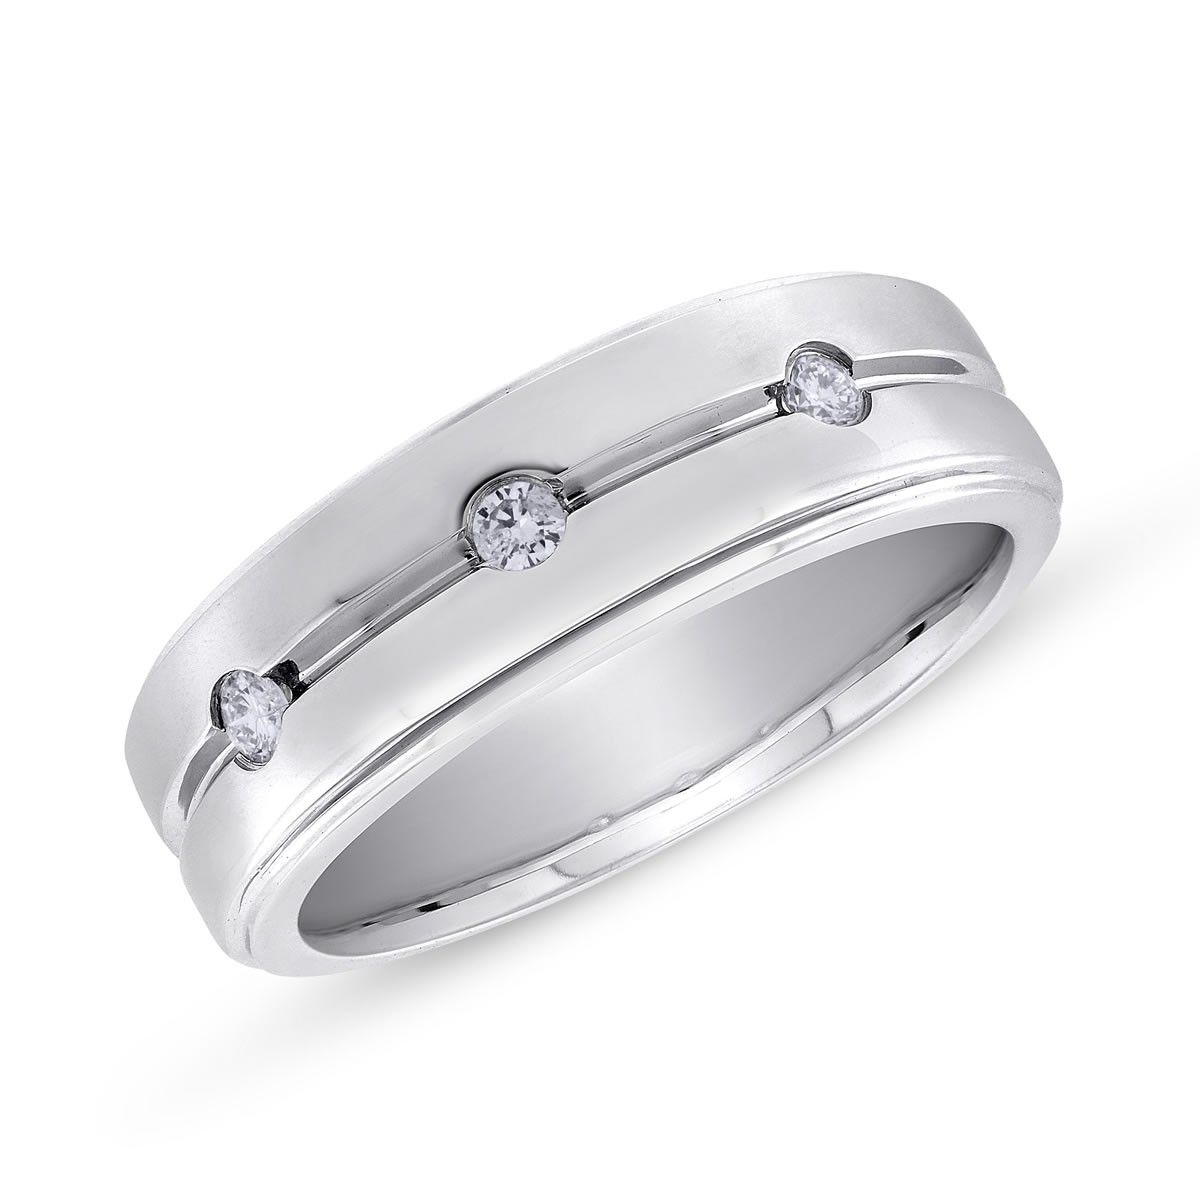 1/7 Ctw Round Cut Diamond Comfort Fit Gents Band In 10k White Gold Intended For Most Recent Diamond Comfort Fit Wedding Bands In 10k Gold (View 4 of 15)